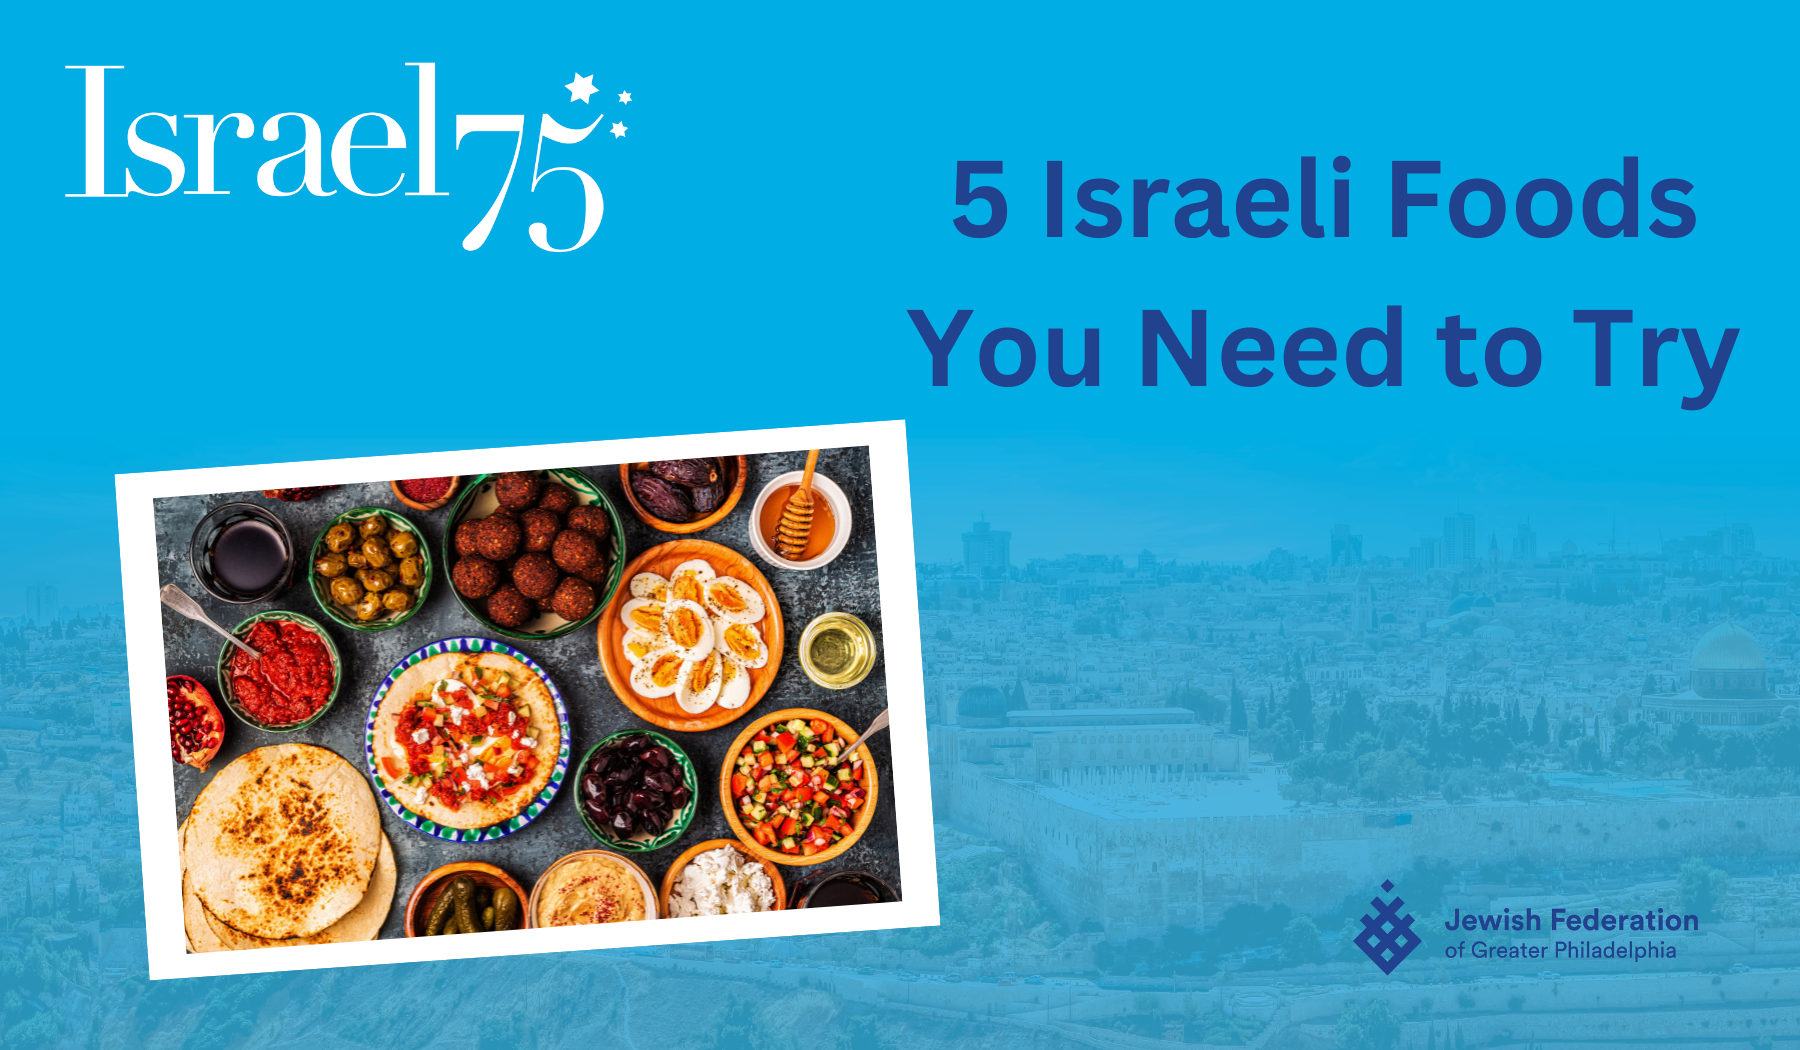 Five Israeli Foods You Need to Try